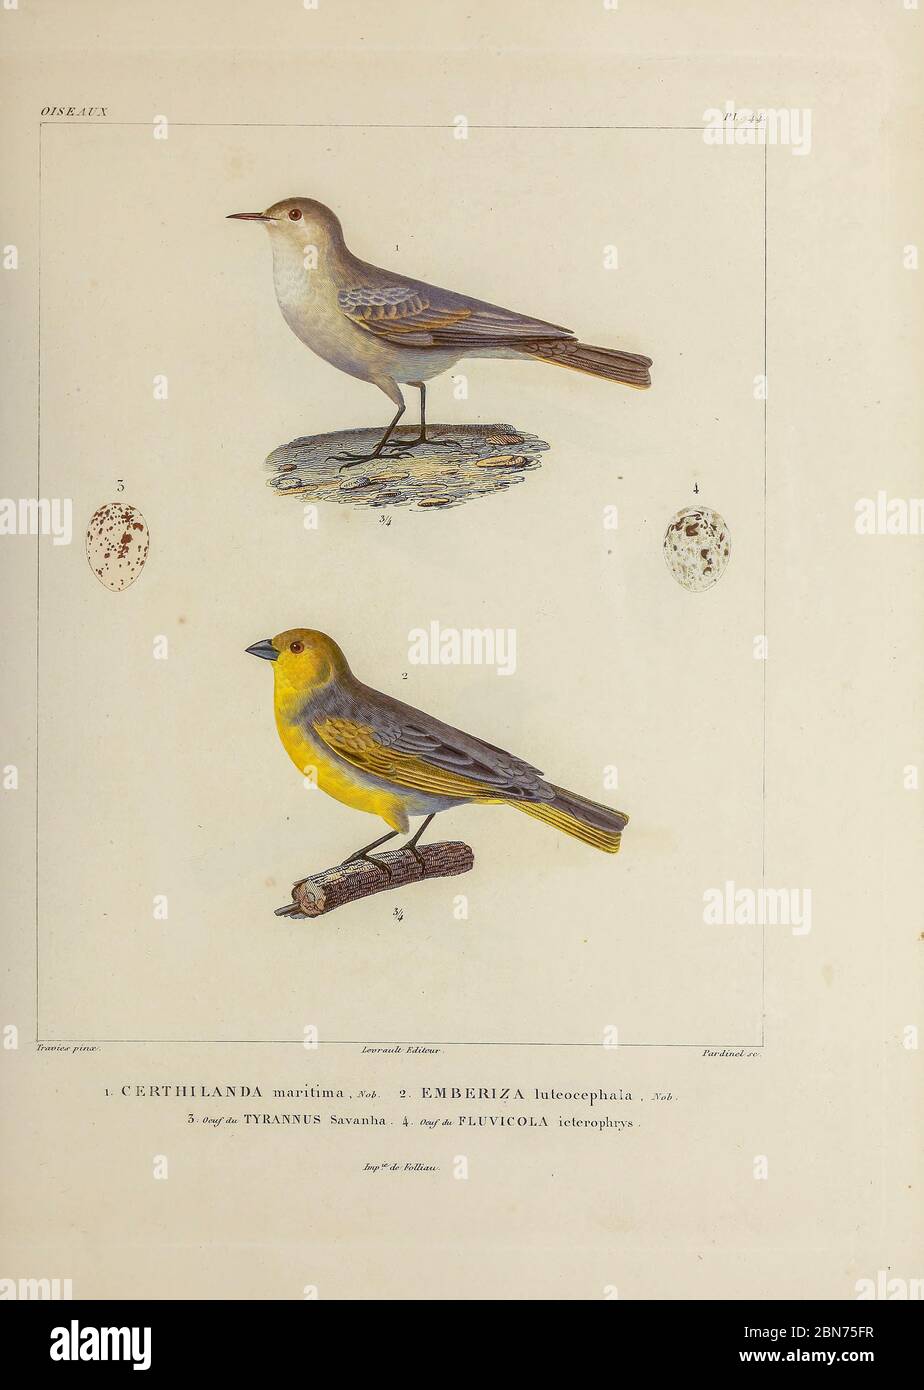 hand coloured sketch Top: greyish miner (Geositta maritima [Here as Certhilanda maritima]) Bottom: citron-headed yellow finch (Sicalis luteocephala [Here as Emberiza luteocephala]) From the book 'Voyage dans l'Amérique Méridionale' [Journey to South America: (Brazil, the eastern republic of Uruguay, the Argentine Republic, Patagonia, the republic of Chile, the republic of Bolivia, the republic of Peru), executed during the years 1826 - 1833] 4th volume Part 3 By: Orbigny, Alcide Dessalines d', d'Orbigny, 1802-1857; Montagne, Jean François Camille, 1784-1866; Martius, Karl Friedrich Philipp vo Stock Photo